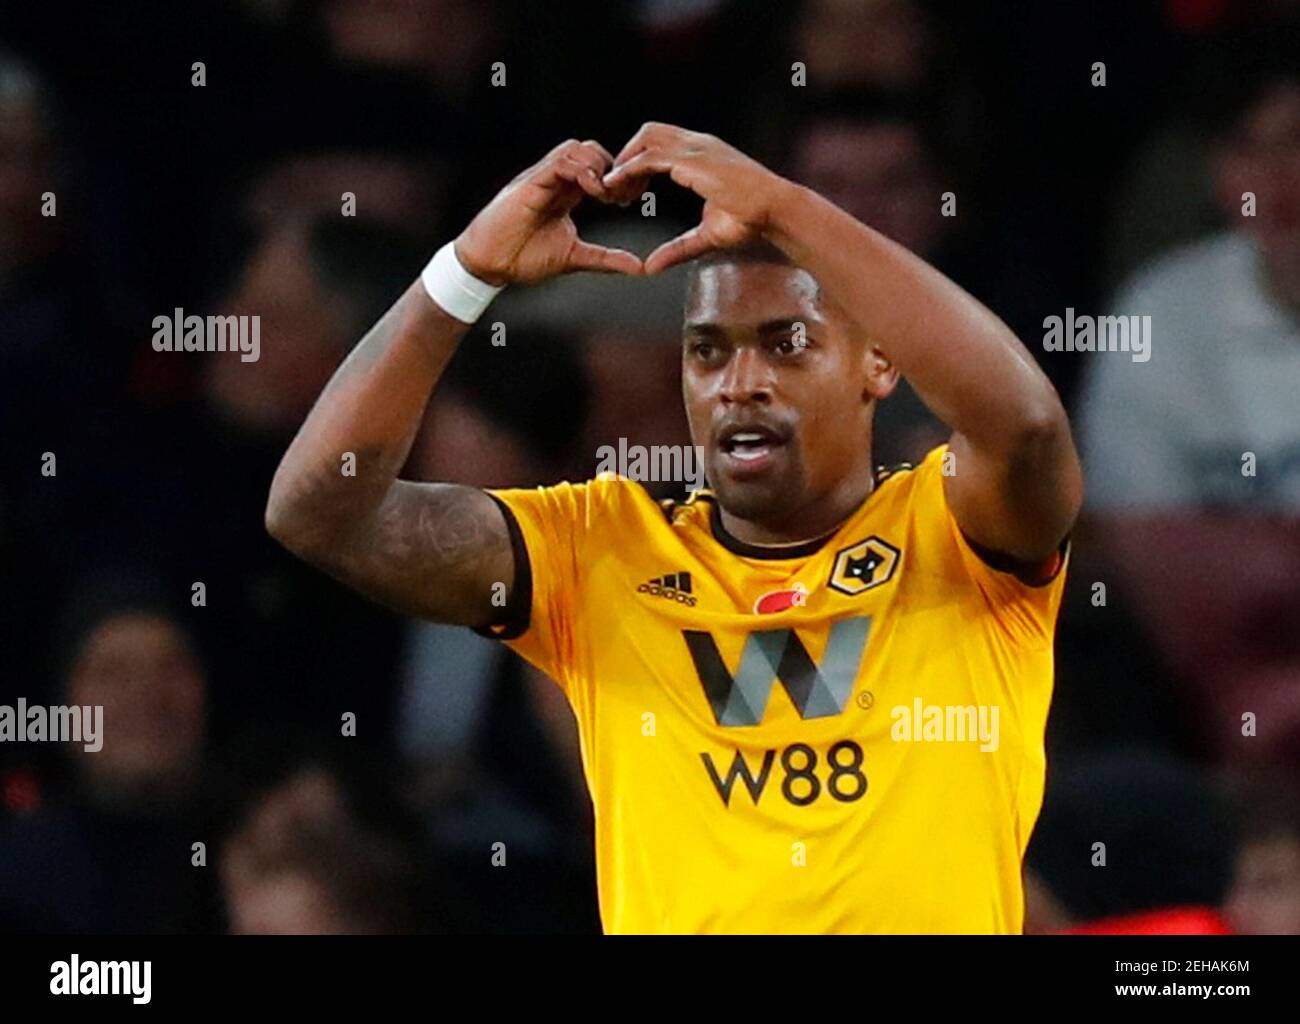 Soccer Football - Premier League - Arsenal v Wolverhampton Wanderers - Emirates Stadium, London, Britain - November 11, 2018  Wolverhampton Wanderers' Ivan Cavaleiro celebrates scoring their first goal  REUTERS/Eddie Keogh  EDITORIAL USE ONLY. No use with unauthorized audio, video, data, fixture lists, club/league logos or "live" services. Online in-match use limited to 75 images, no video emulation. No use in betting, games or single club/league/player publications.  Please contact your account representative for further details. Stock Photo